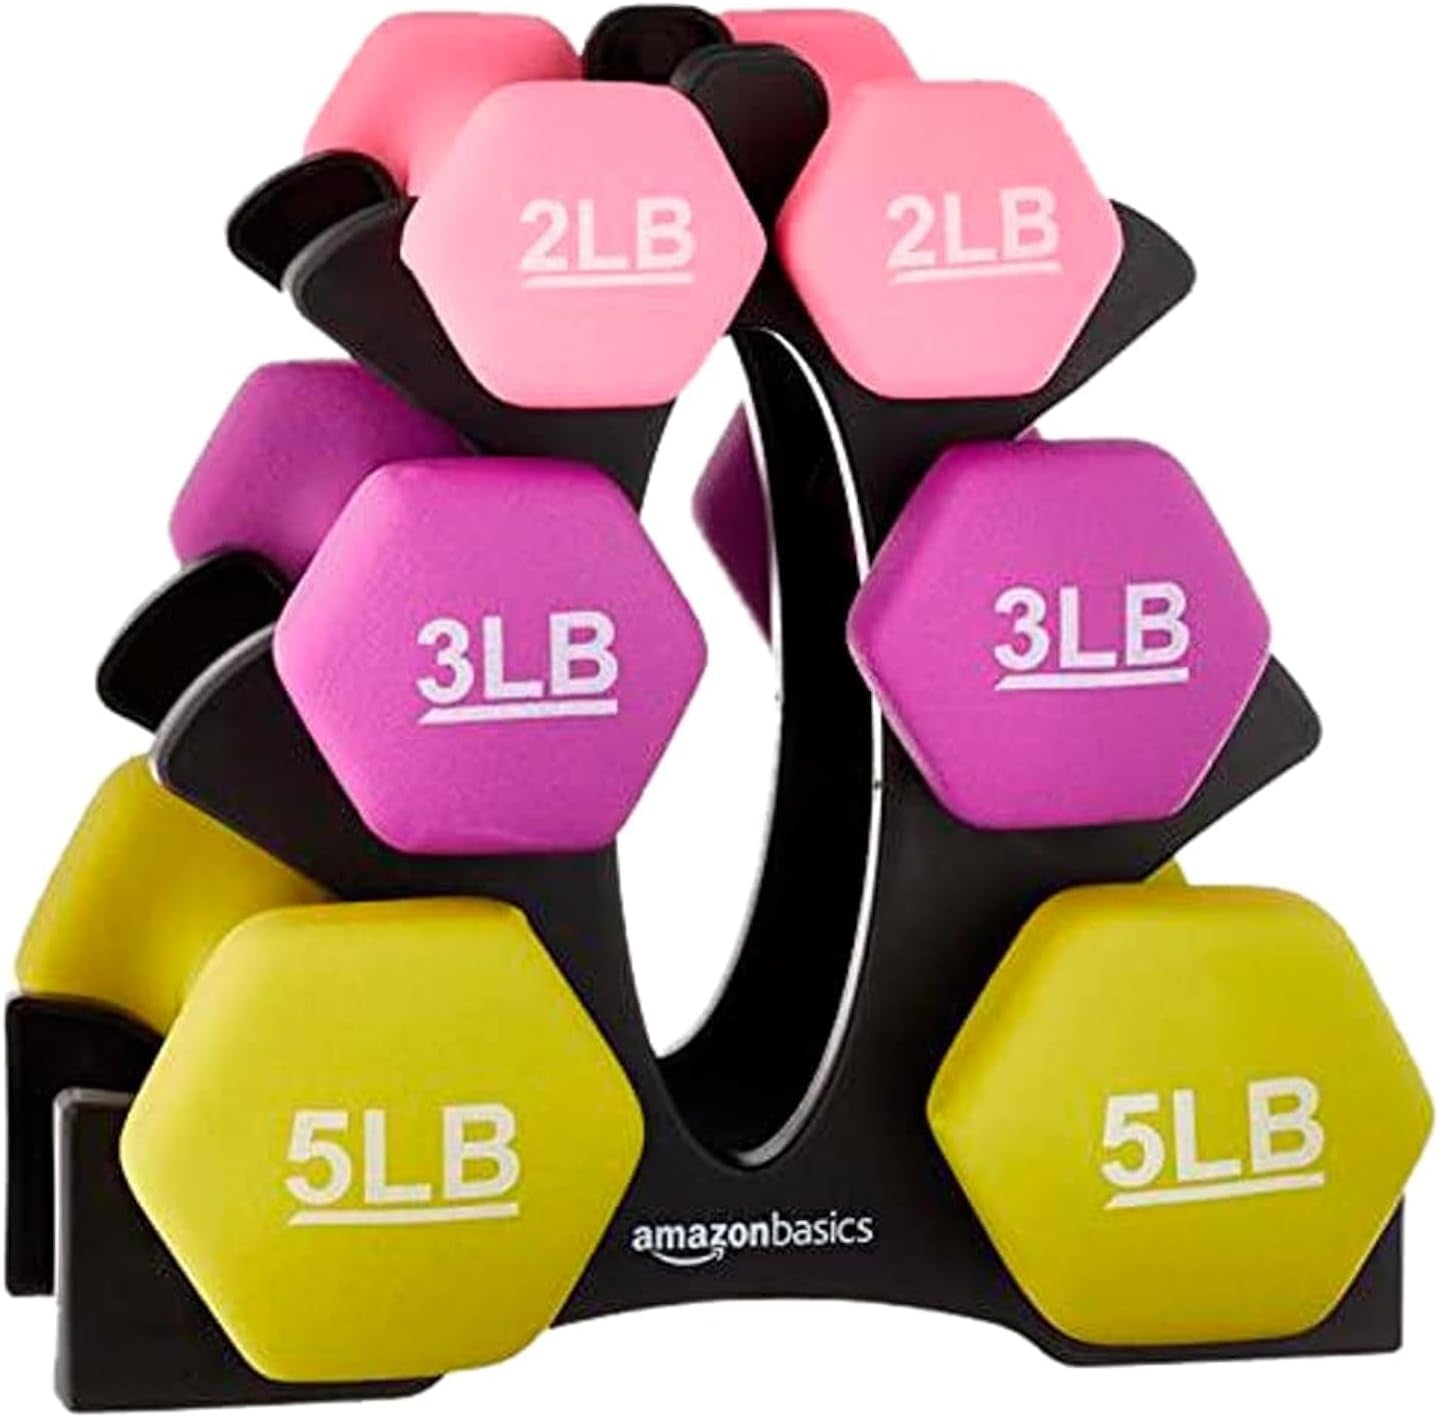 Easy Grip Workout Dumbbell, Neoprene Coated, Various Sets and Weights Available